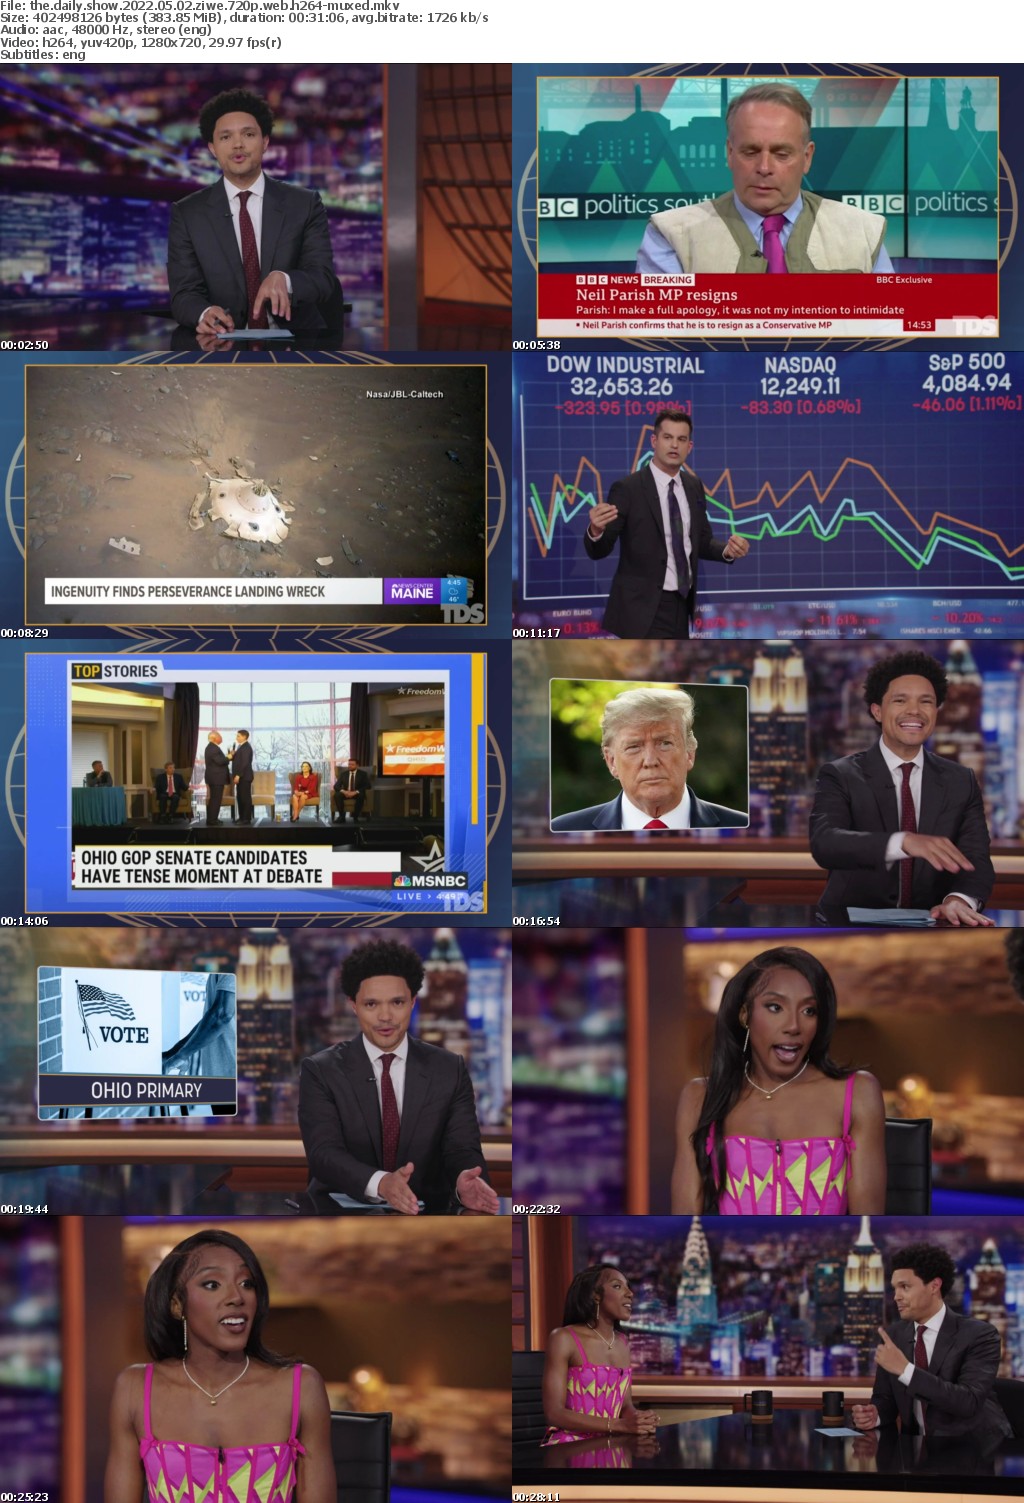 The Daily Show 2022 05 02 Ziwe 720p WEB H264-MUXED